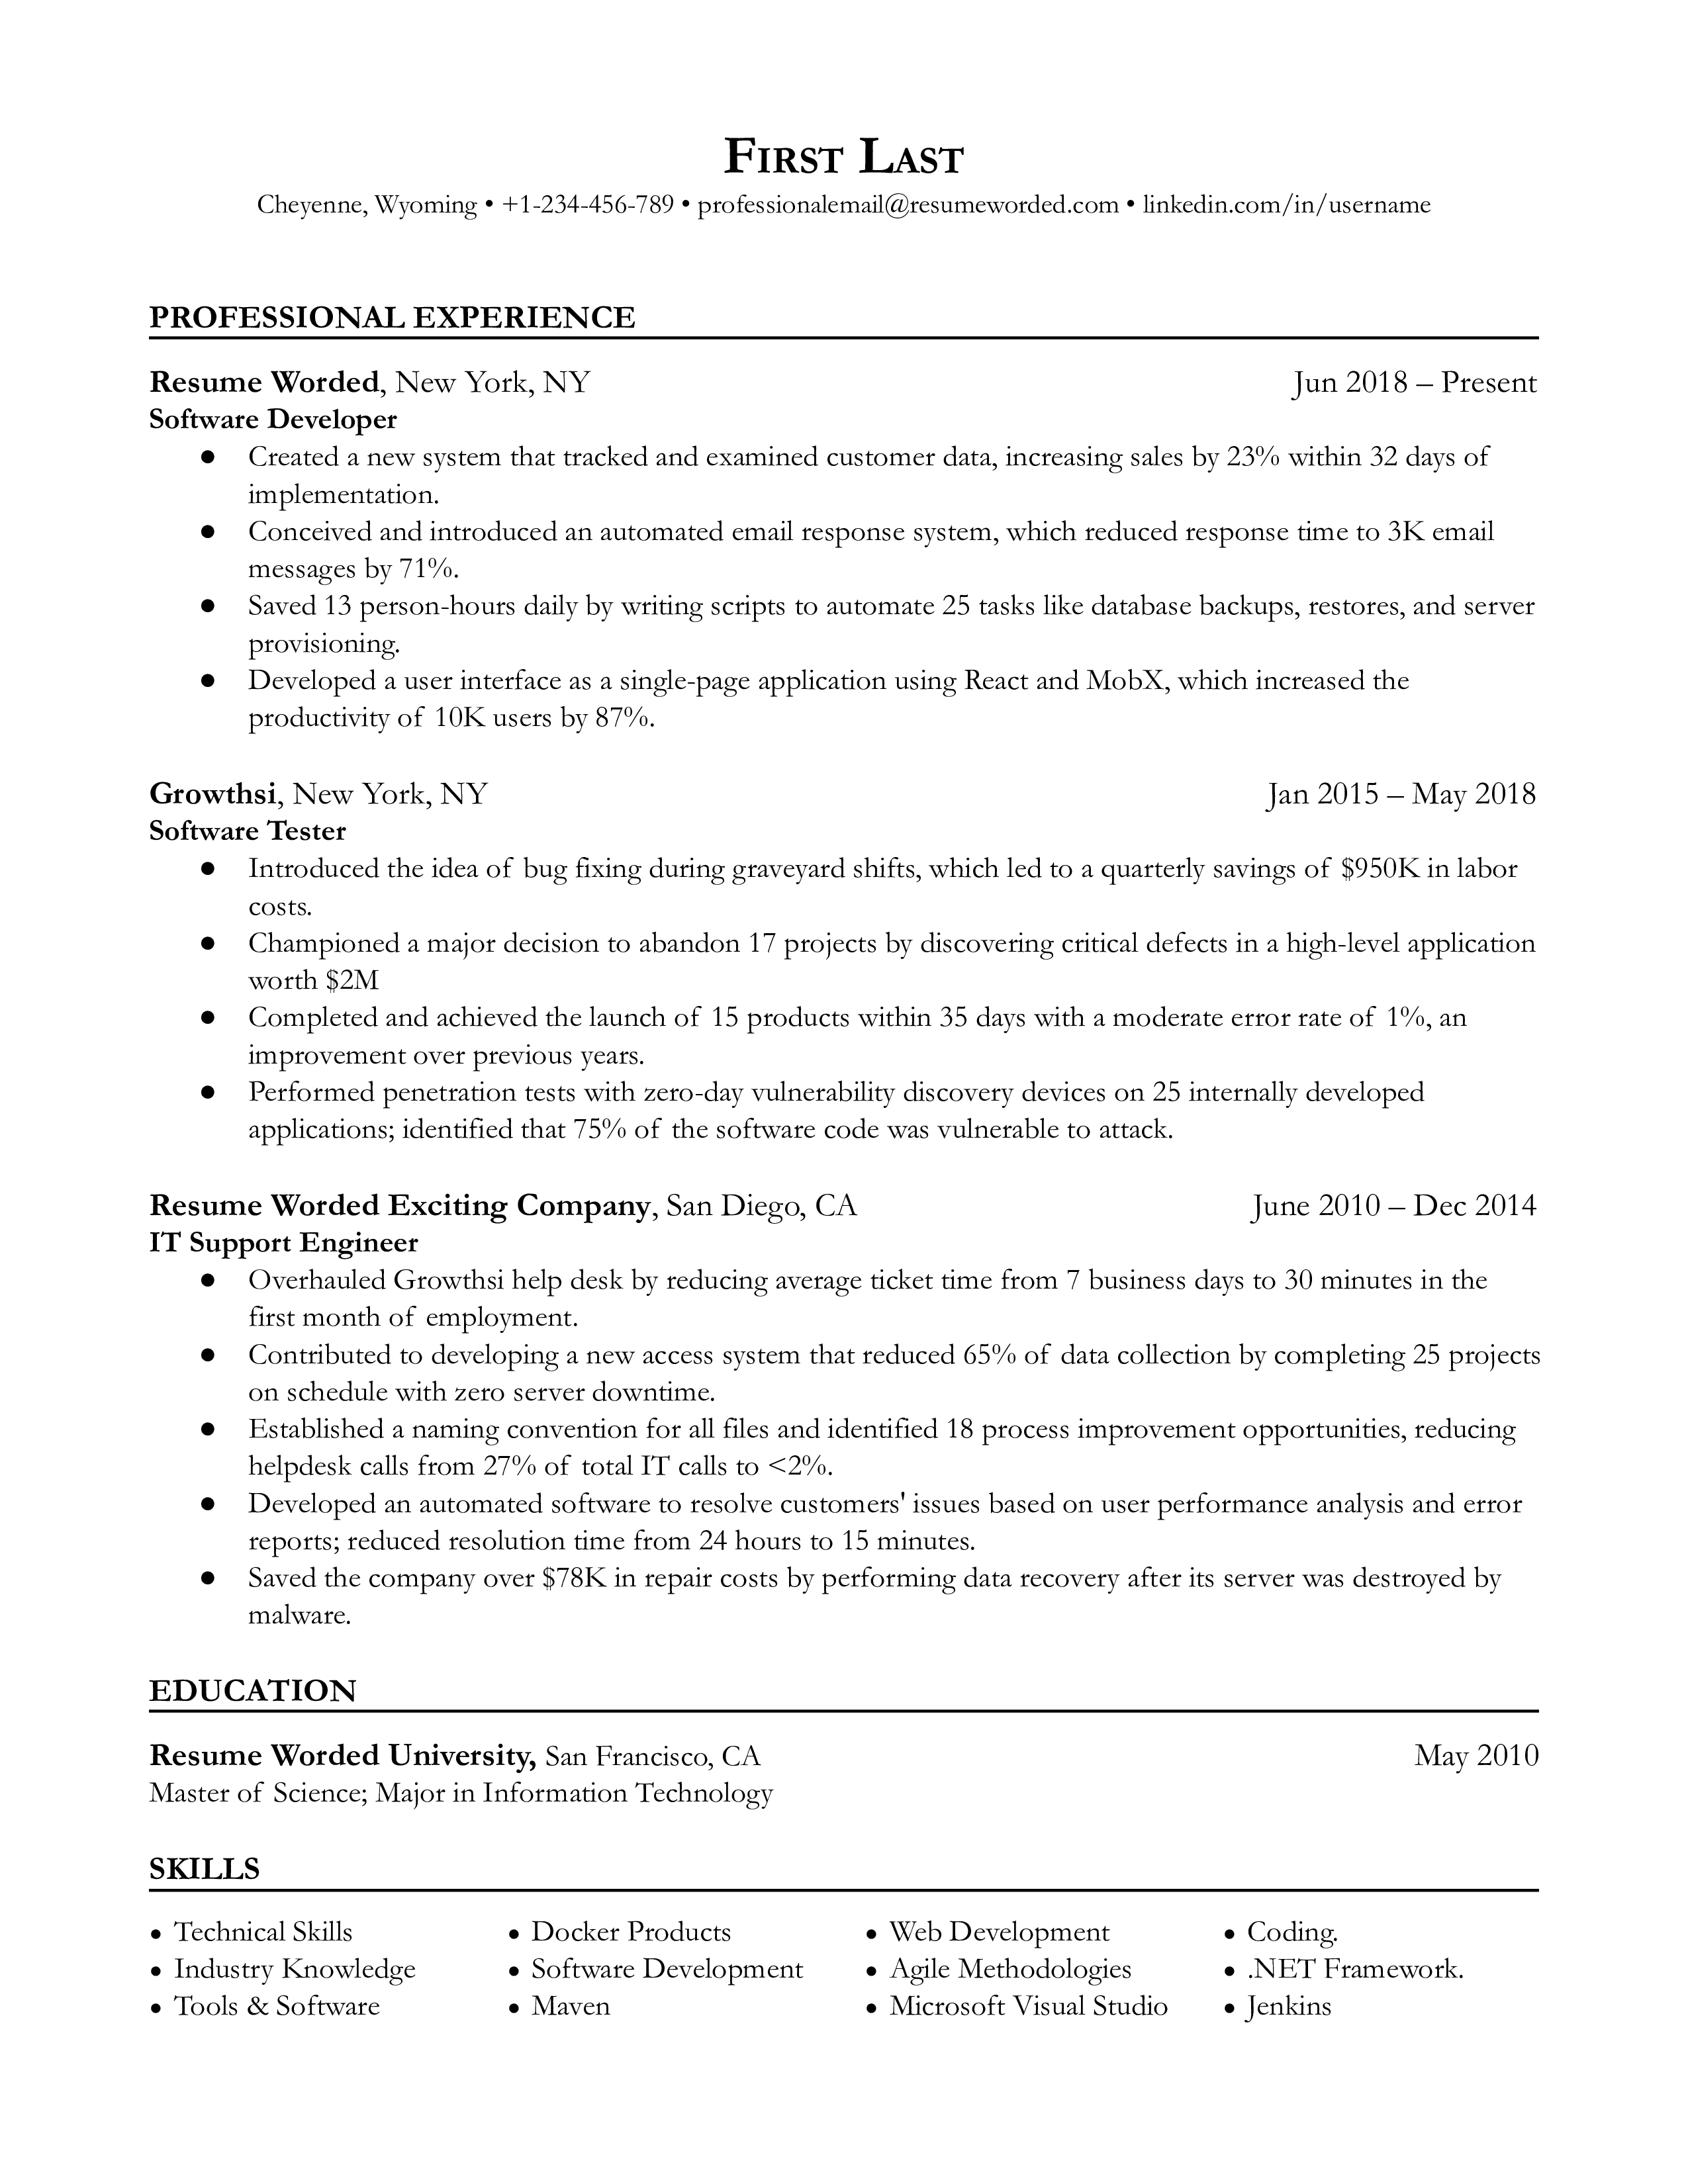  A software developer resume template that emphasizes professional experience